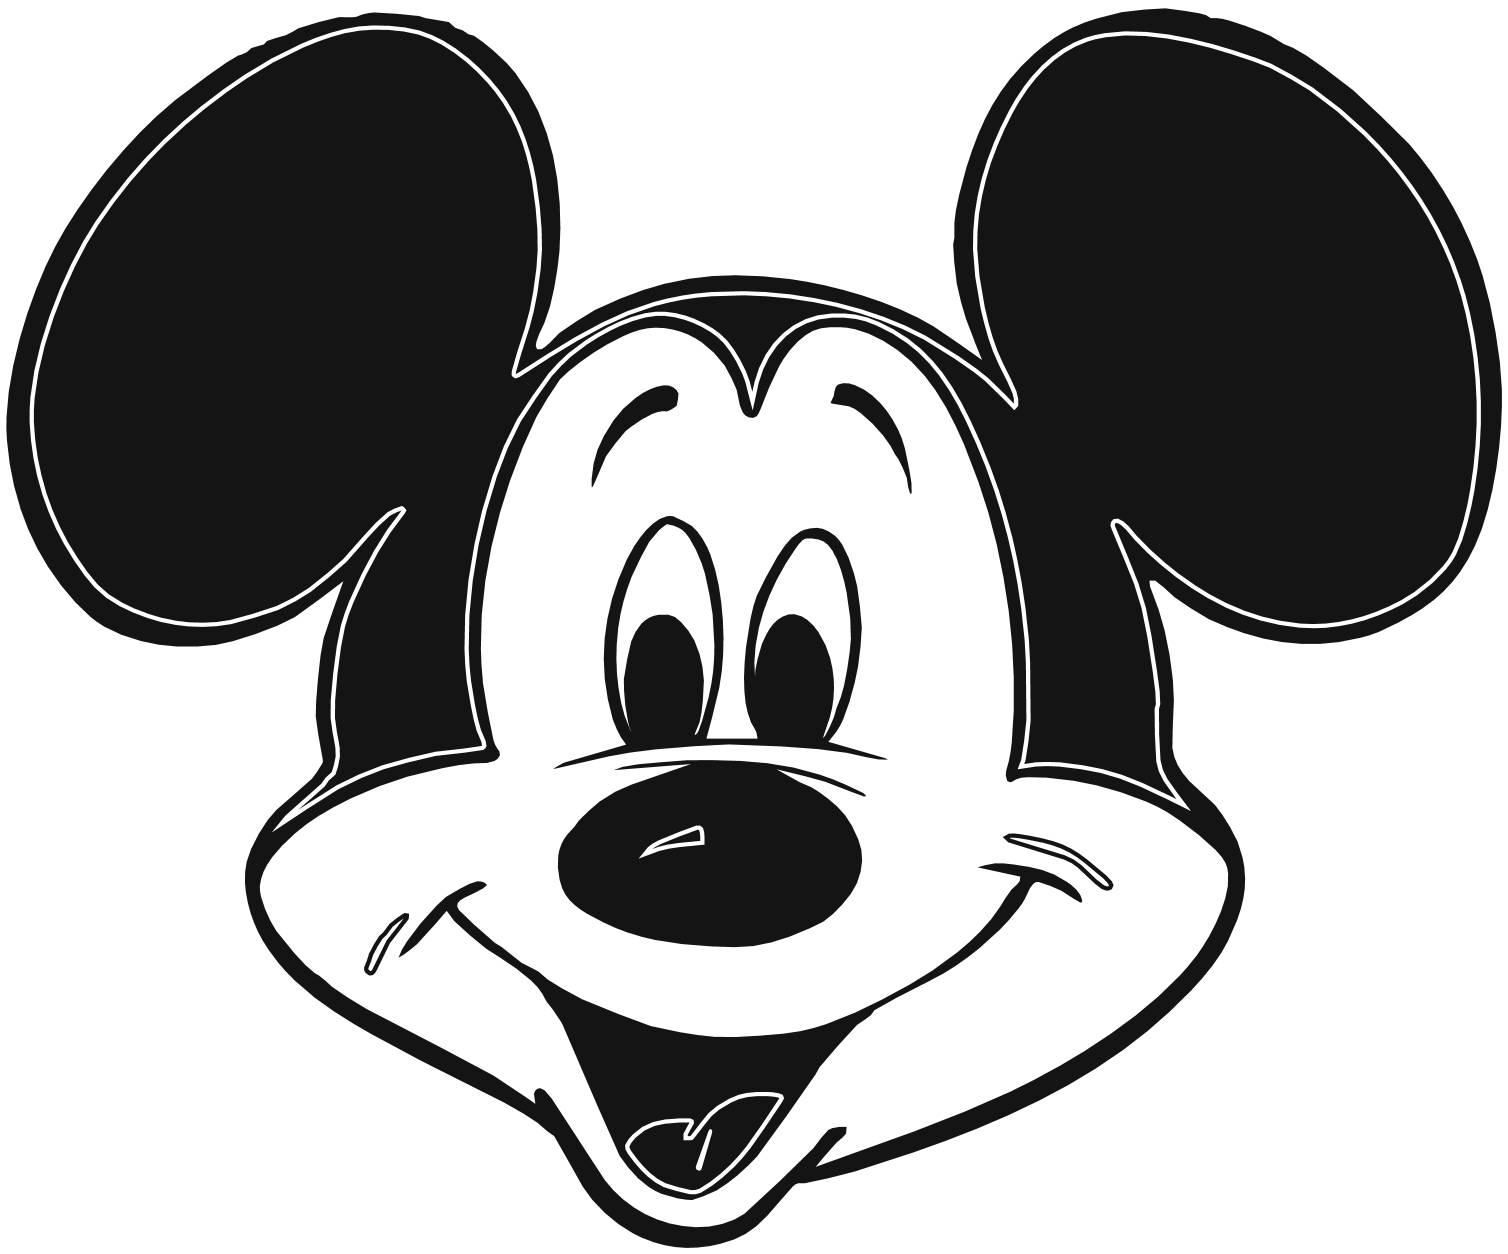 Mickey Mouse Cartoon 1260 Hd Wallpapers in Cartoons - Imagesci.com